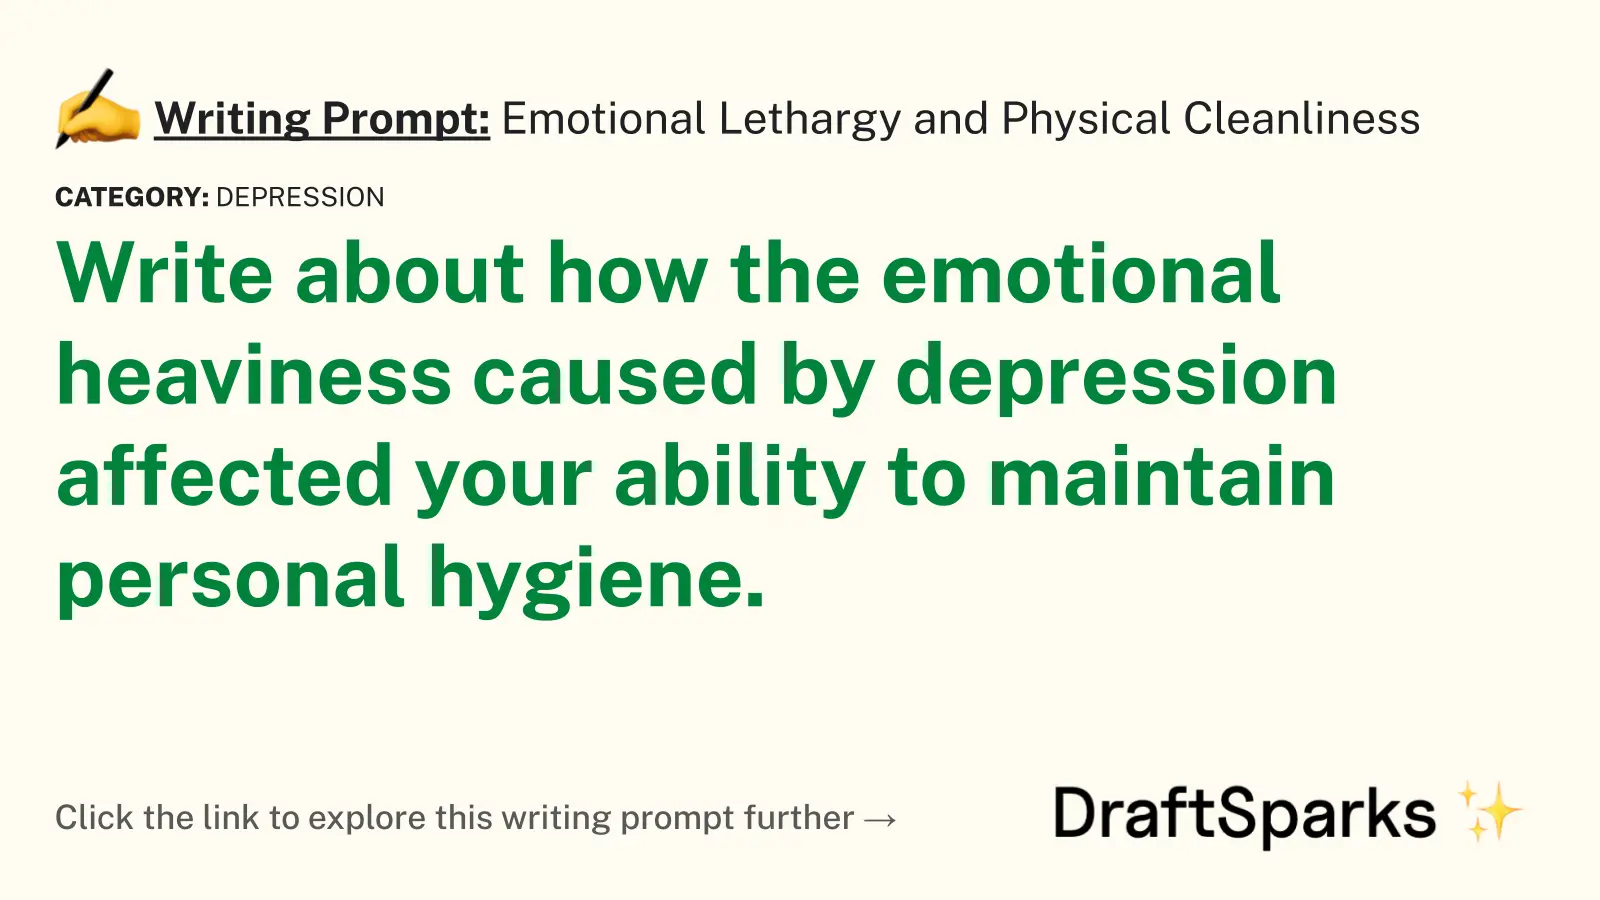 Emotional Lethargy and Physical Cleanliness